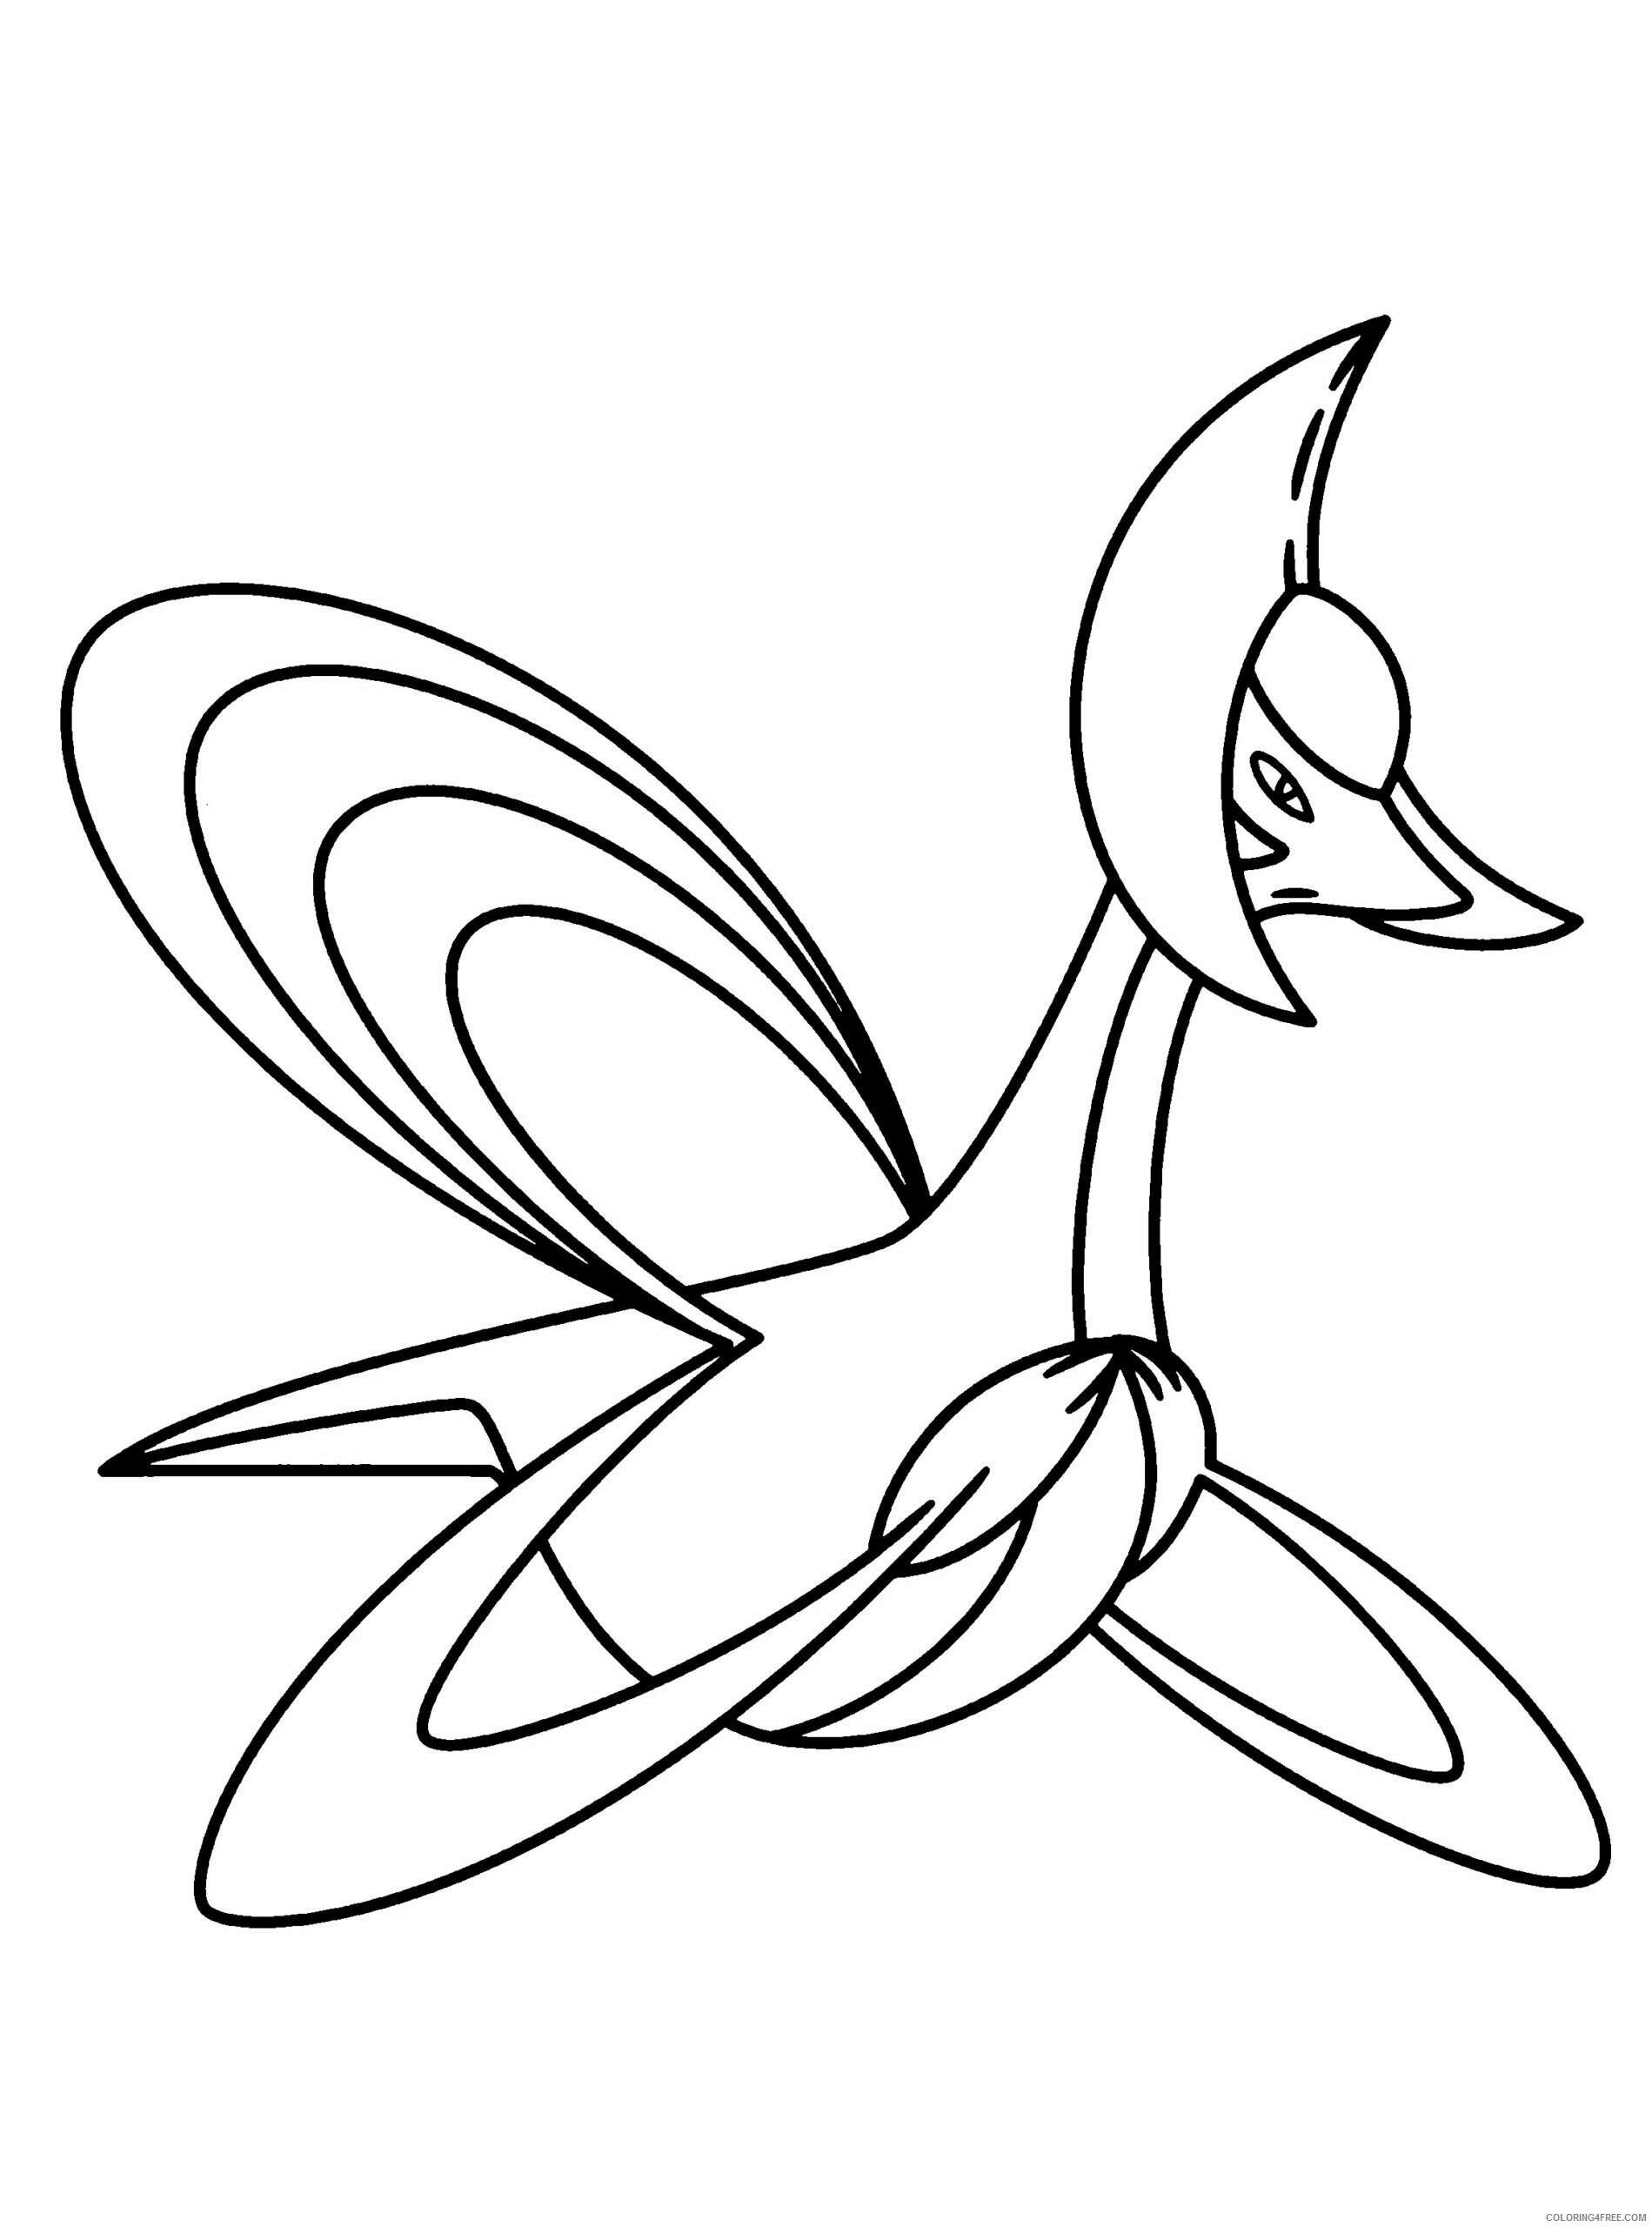 Pokemon Diamond Pearl Coloring Pages Anime pokemon diamond pearl 283 Printable 2021 780 Coloring4free